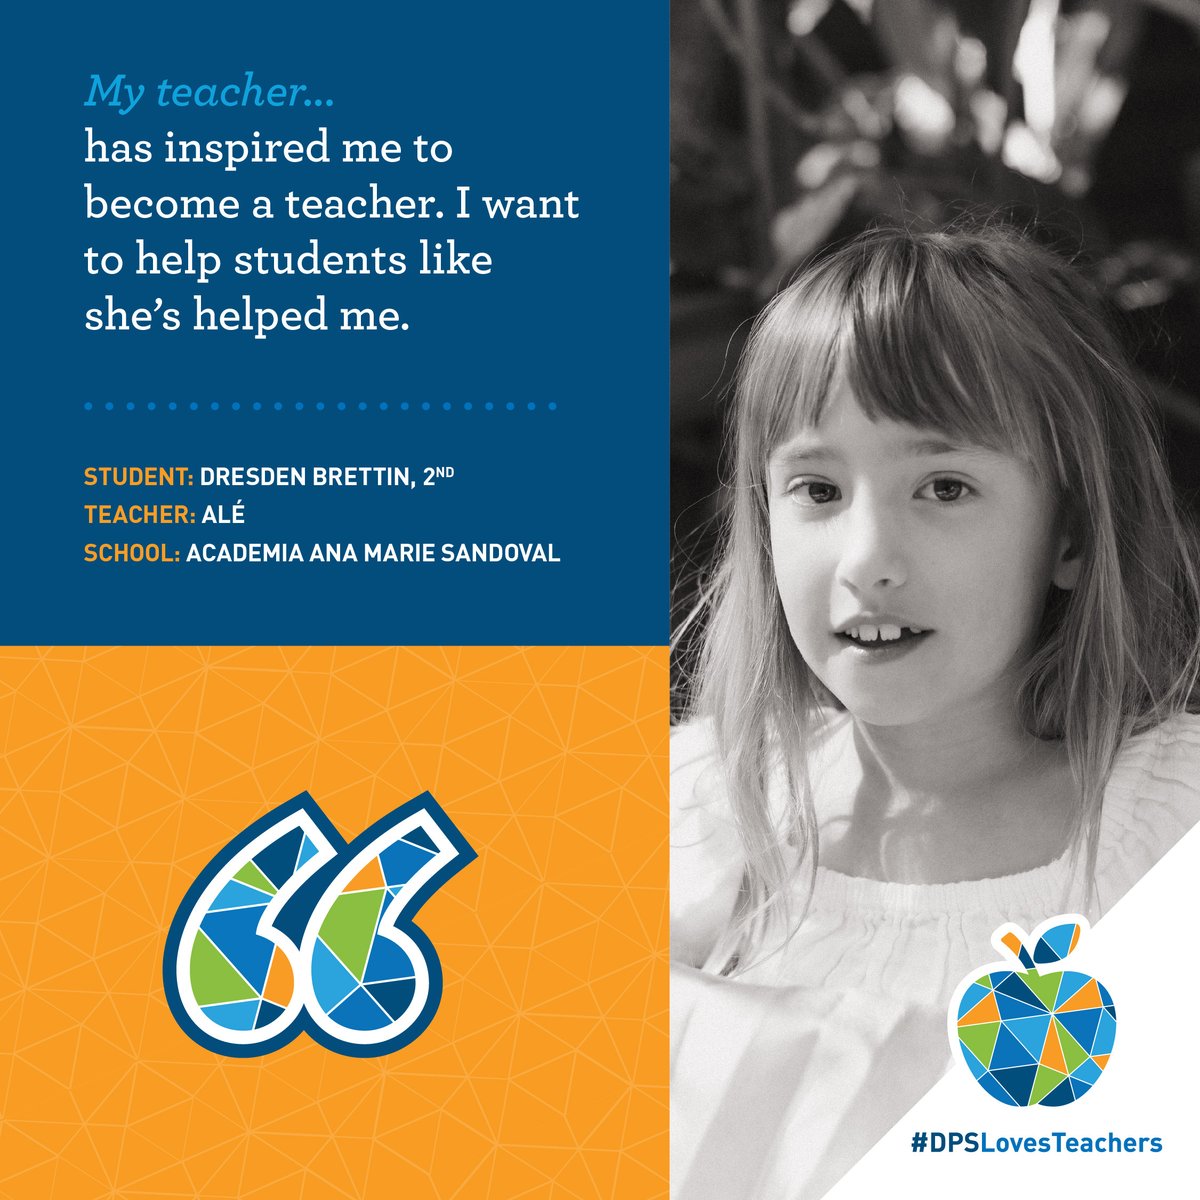 💙Dear teachers, thank you for inspiring and empowering generations of students! Your work truly makes a lasting difference in their lives!💙 #teacherappreciationweek #teacherfeature